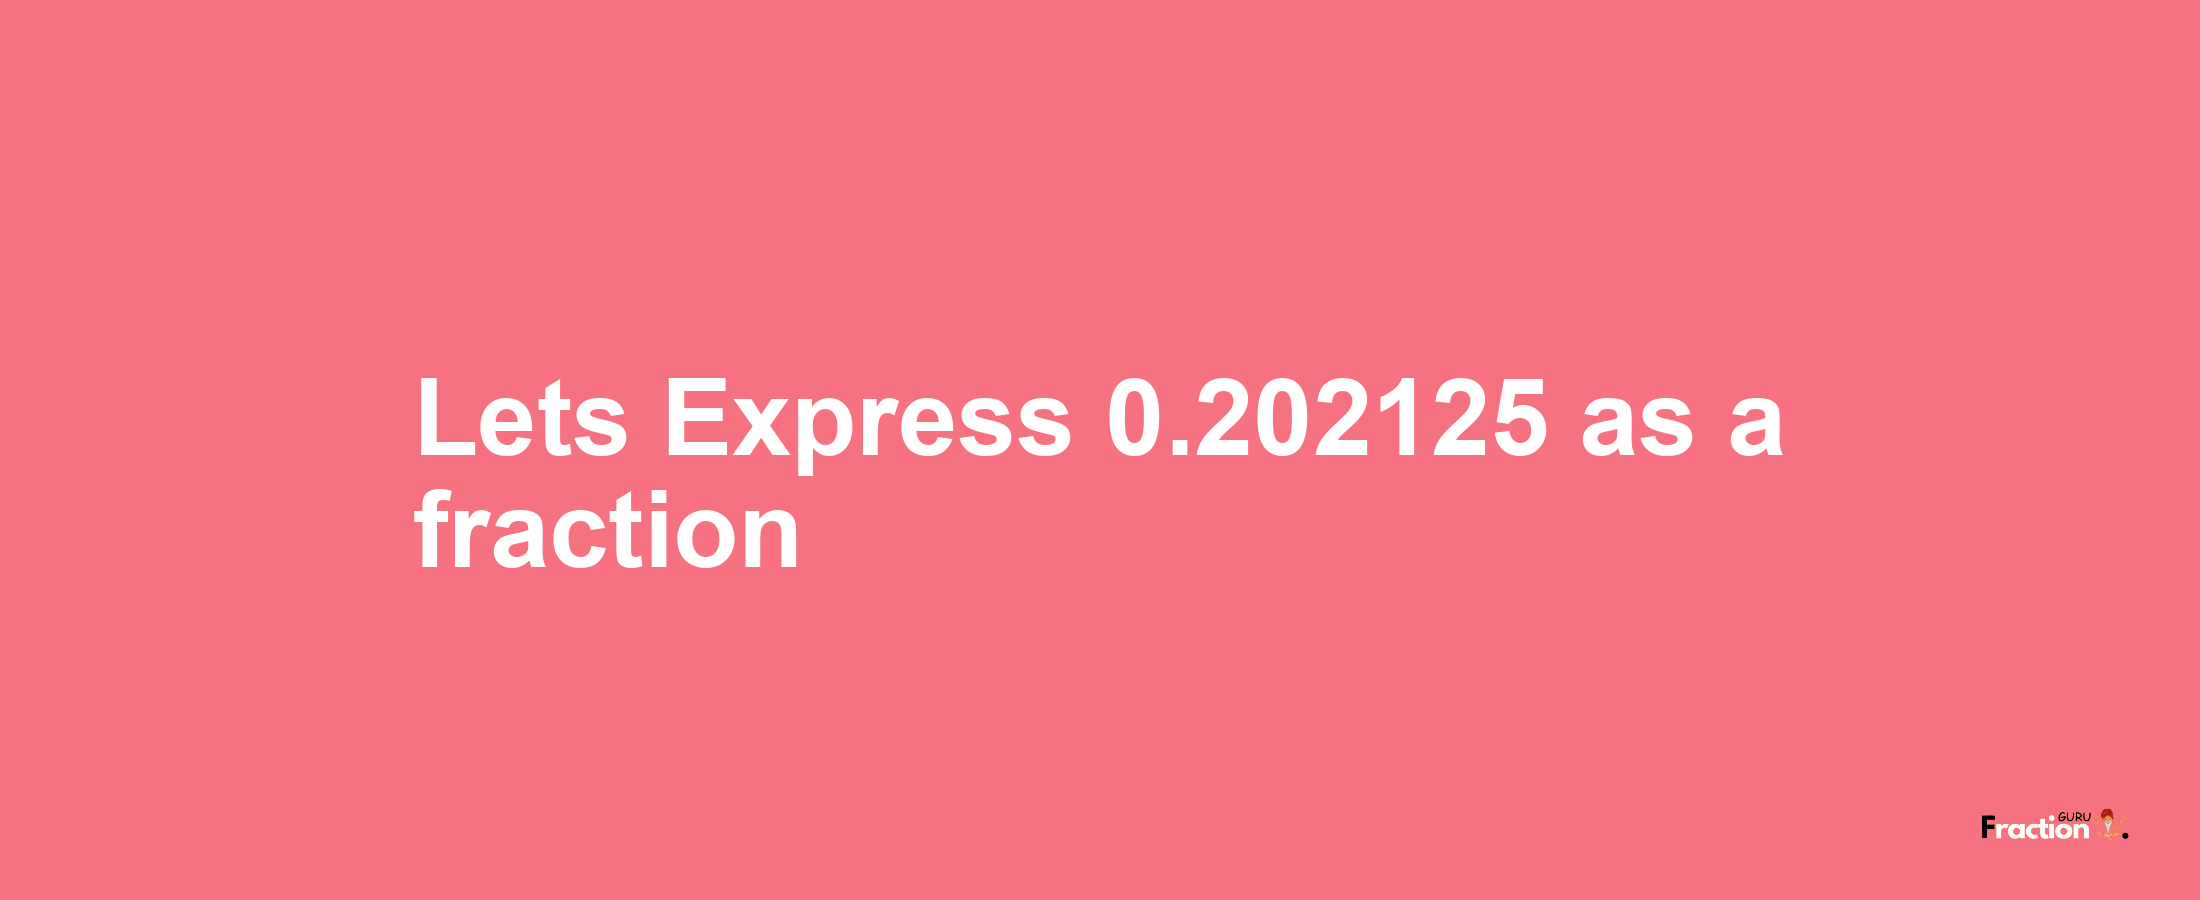 Lets Express 0.202125 as afraction